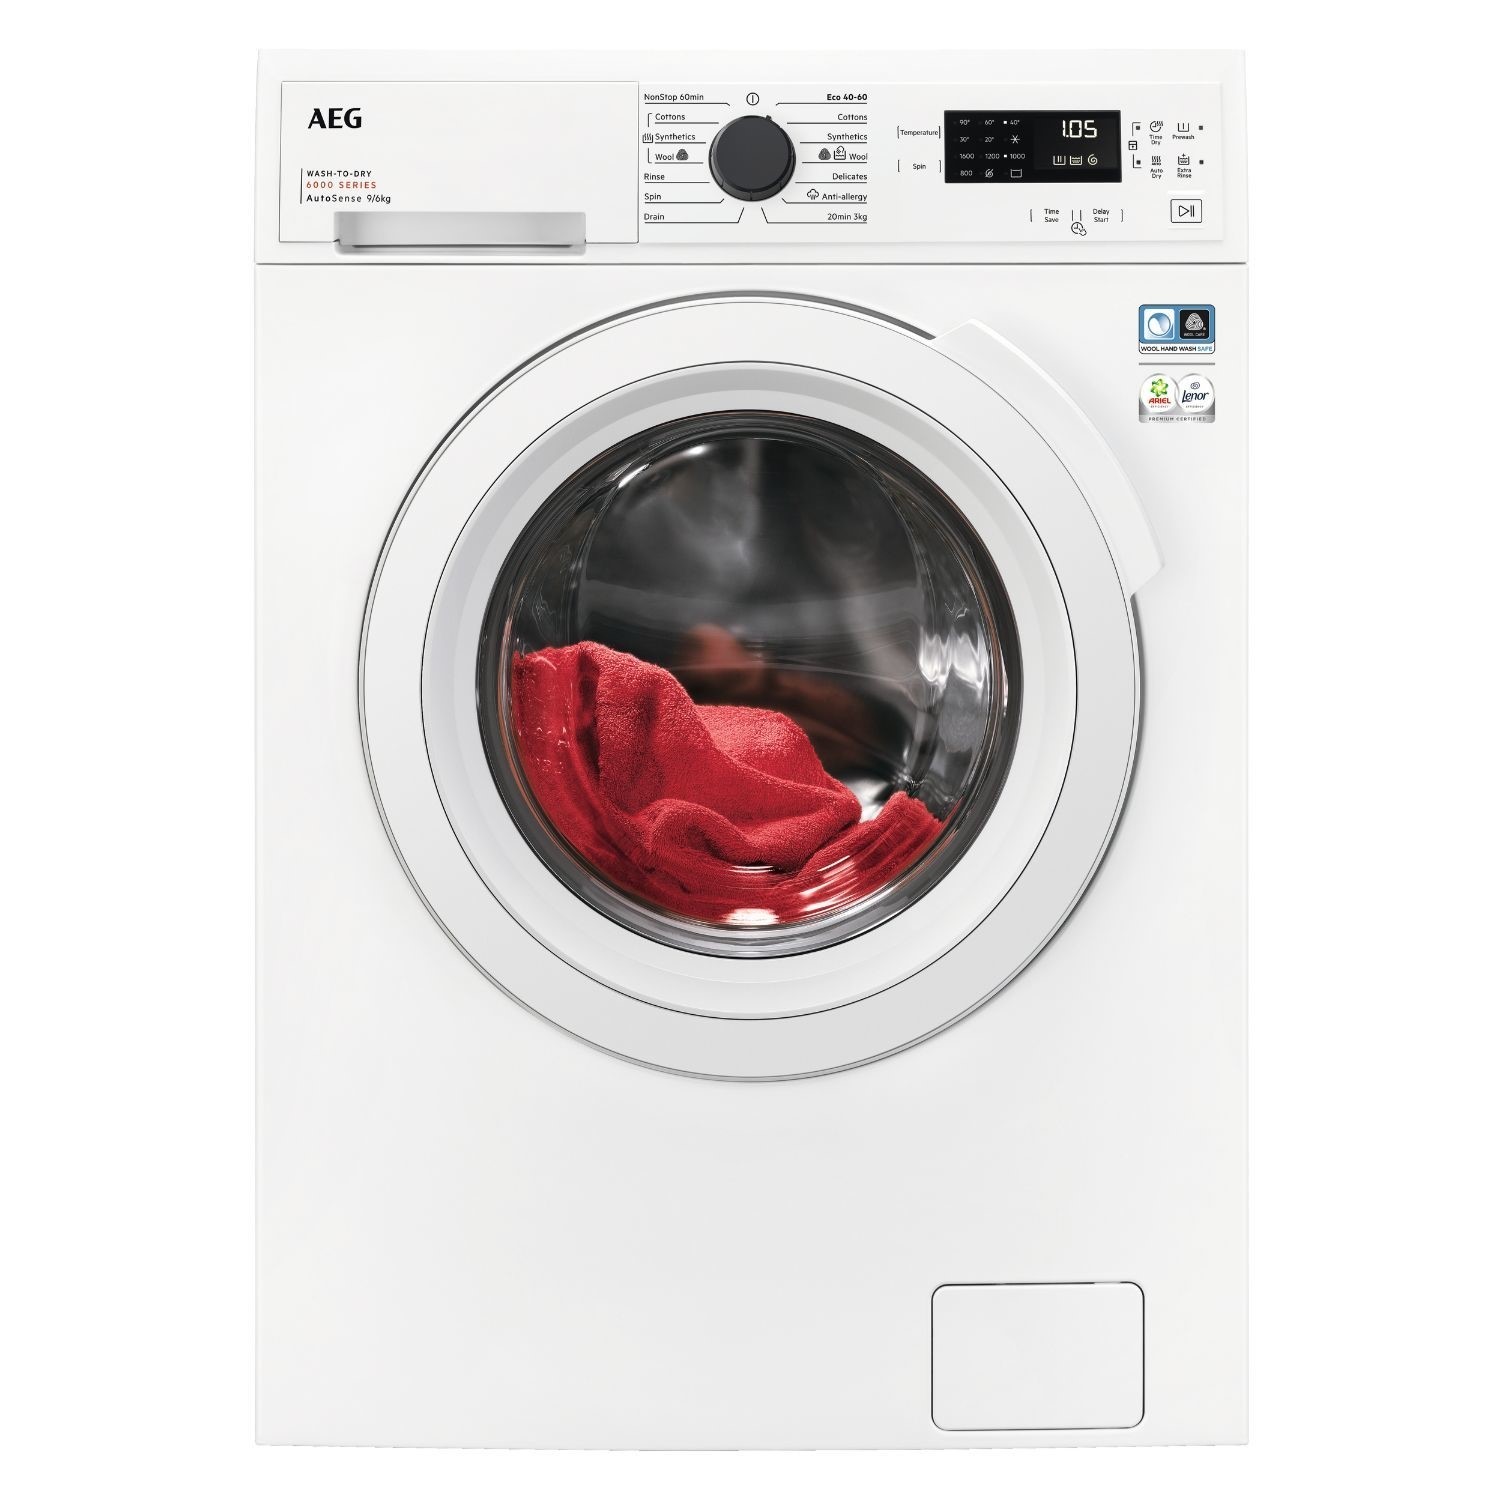 Photos - Other for Computer AEG 6000 Series AutoSense 9kg Wash 6kg Dry 1600rpm Washer Dryer - Whi LWX6 